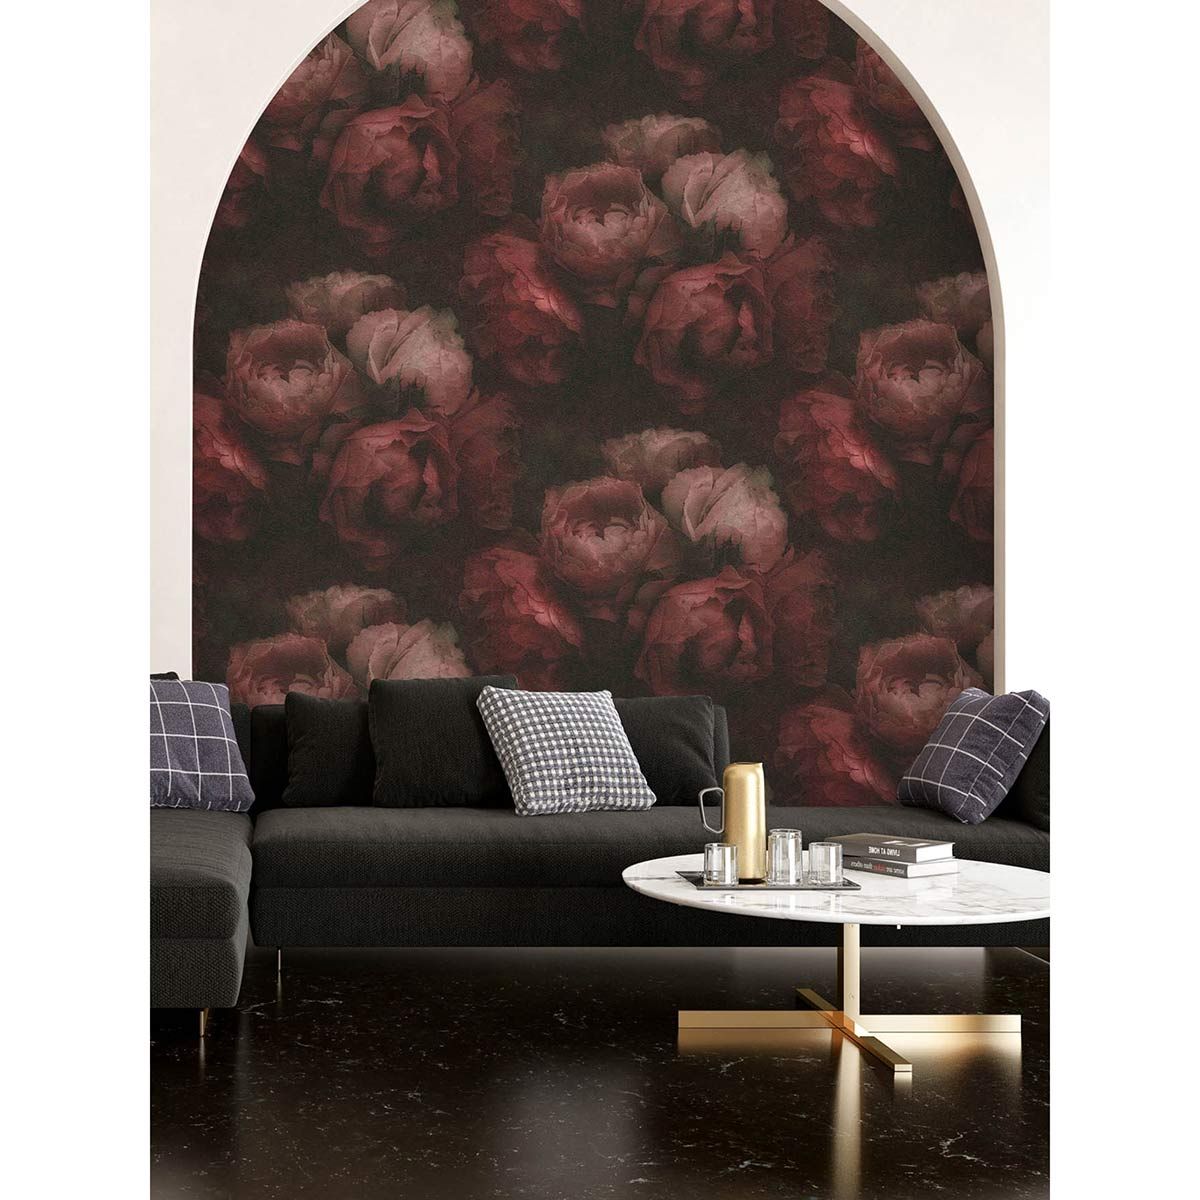 Buy Glowvia Royal Red Wallpaper for Wall Floral Wallpaper for  HomeOfficeLiving RoomHotelCafé Size57 Sqft Online at Low Prices in  India  Amazonin